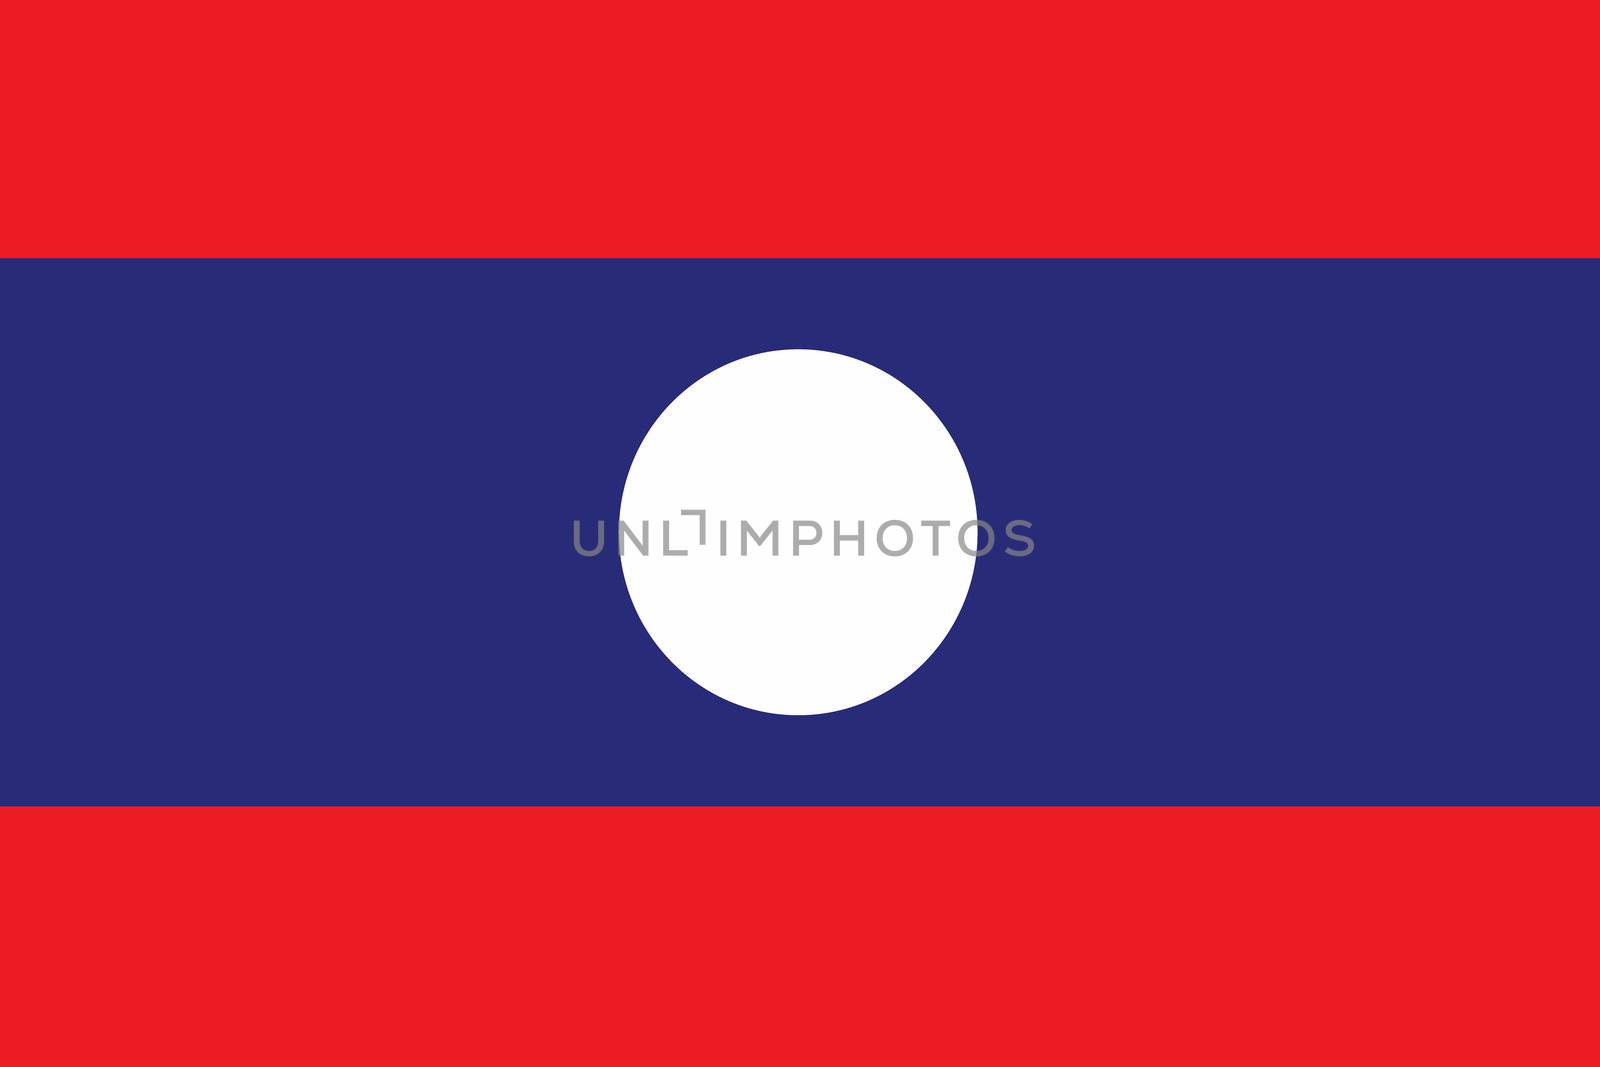 An Illustrated Drawing of the flag of Laos